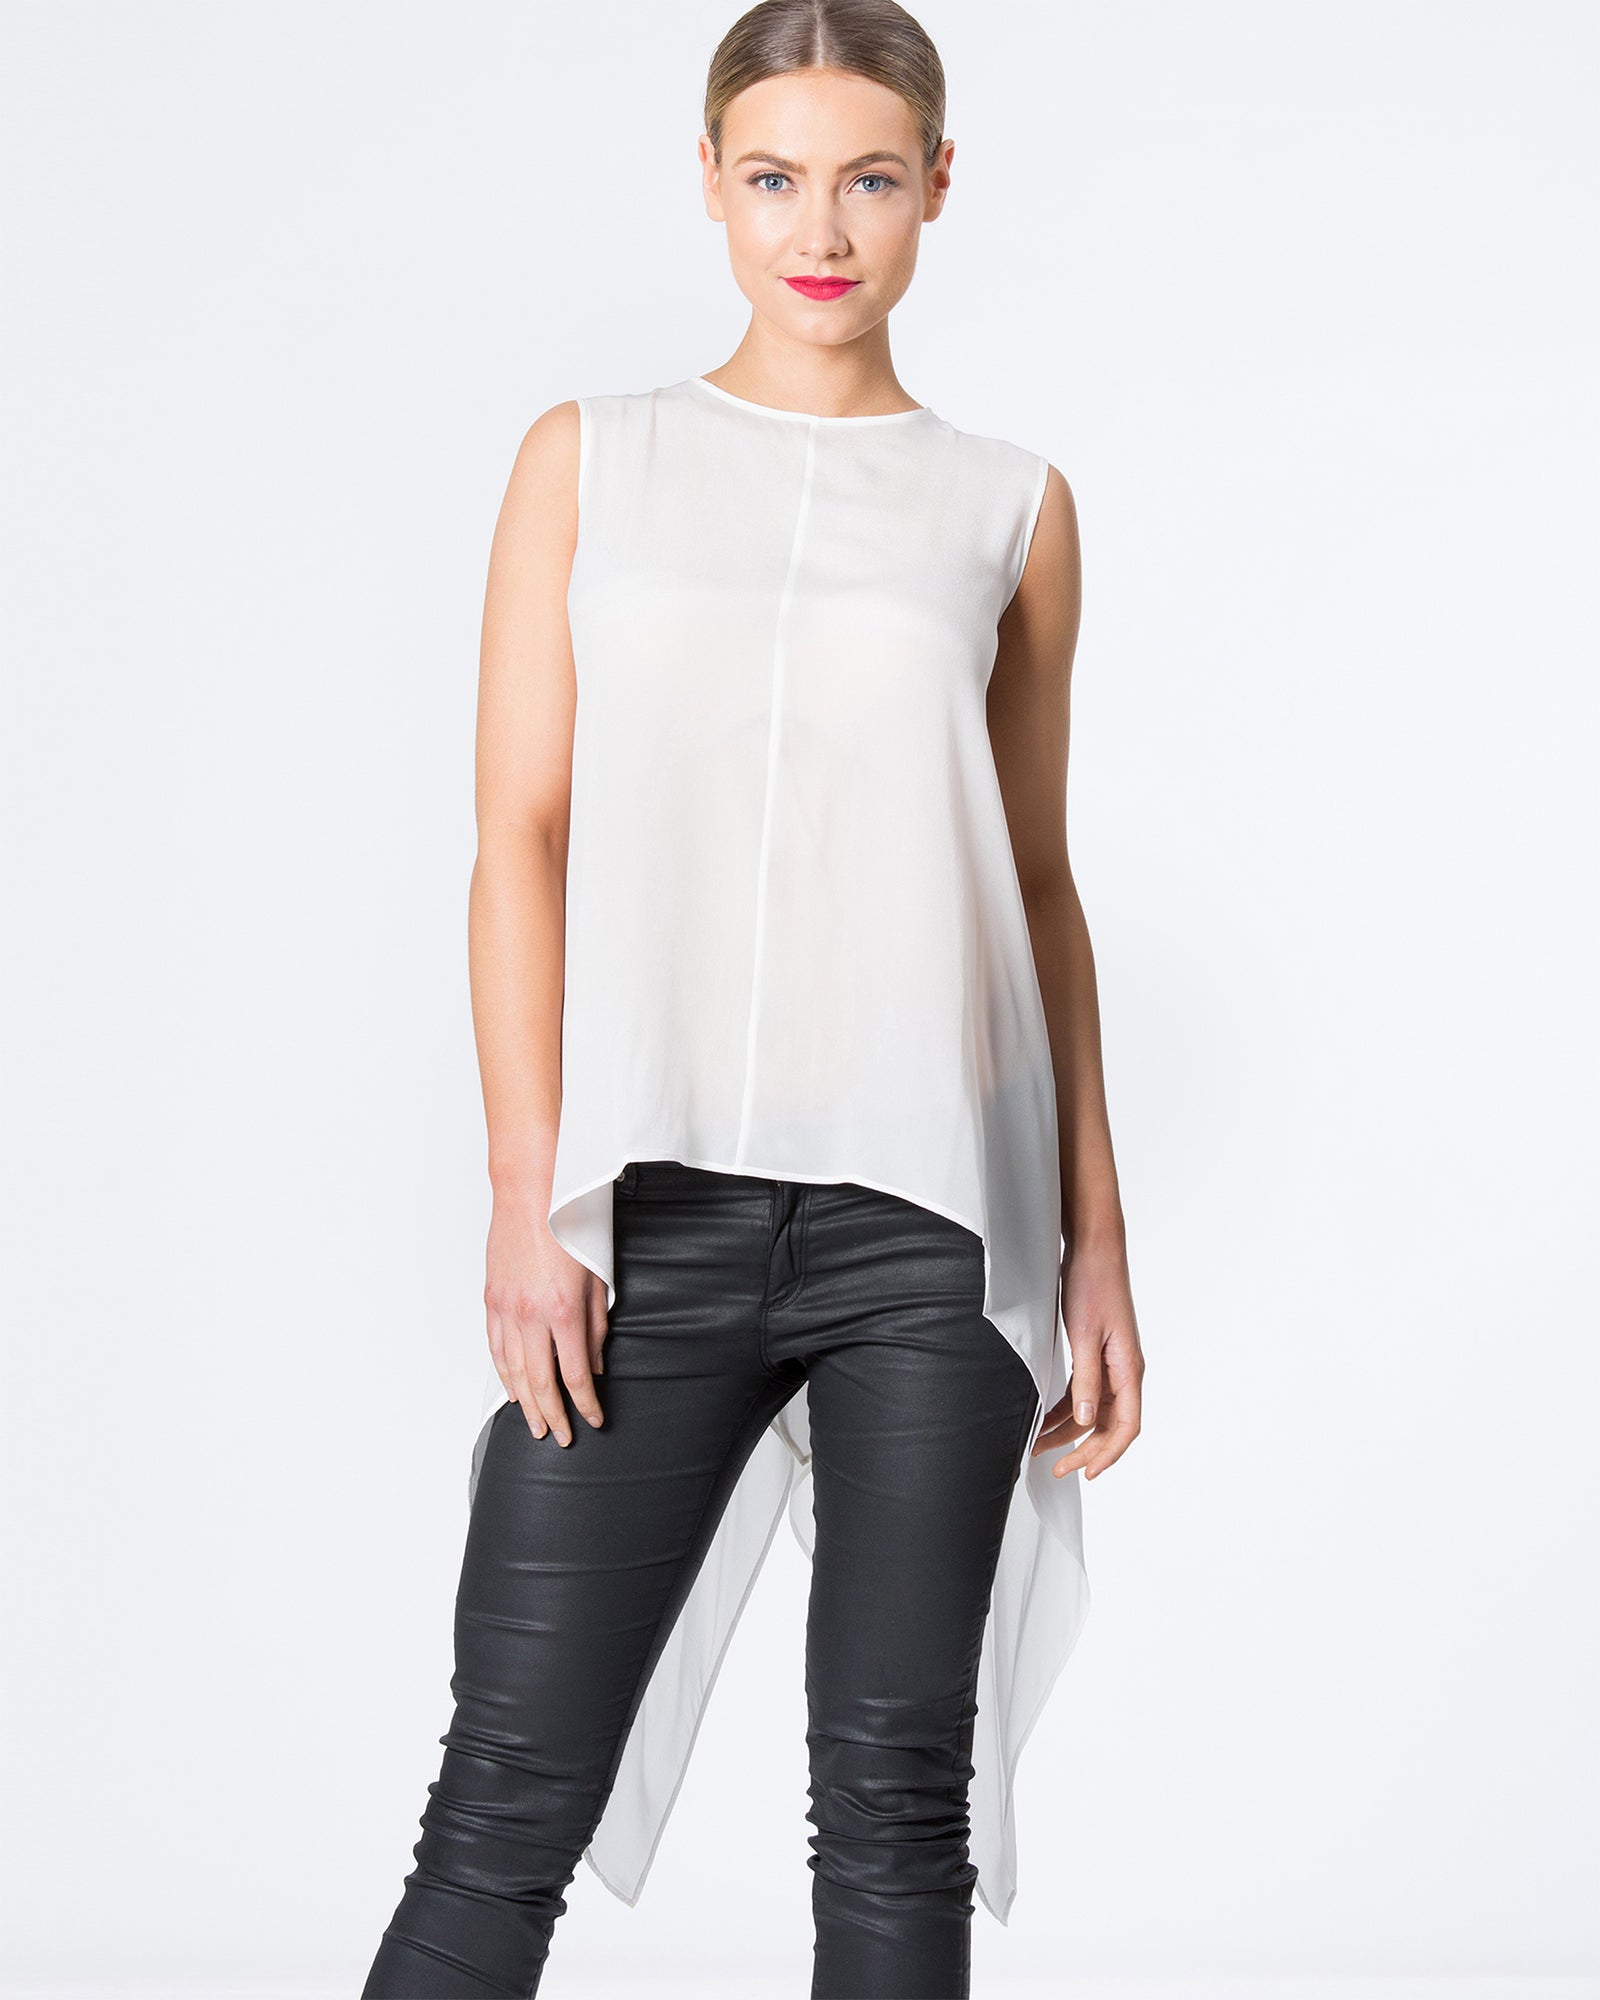 Silk Batwing Top with Draping Sides and Keyhole Back